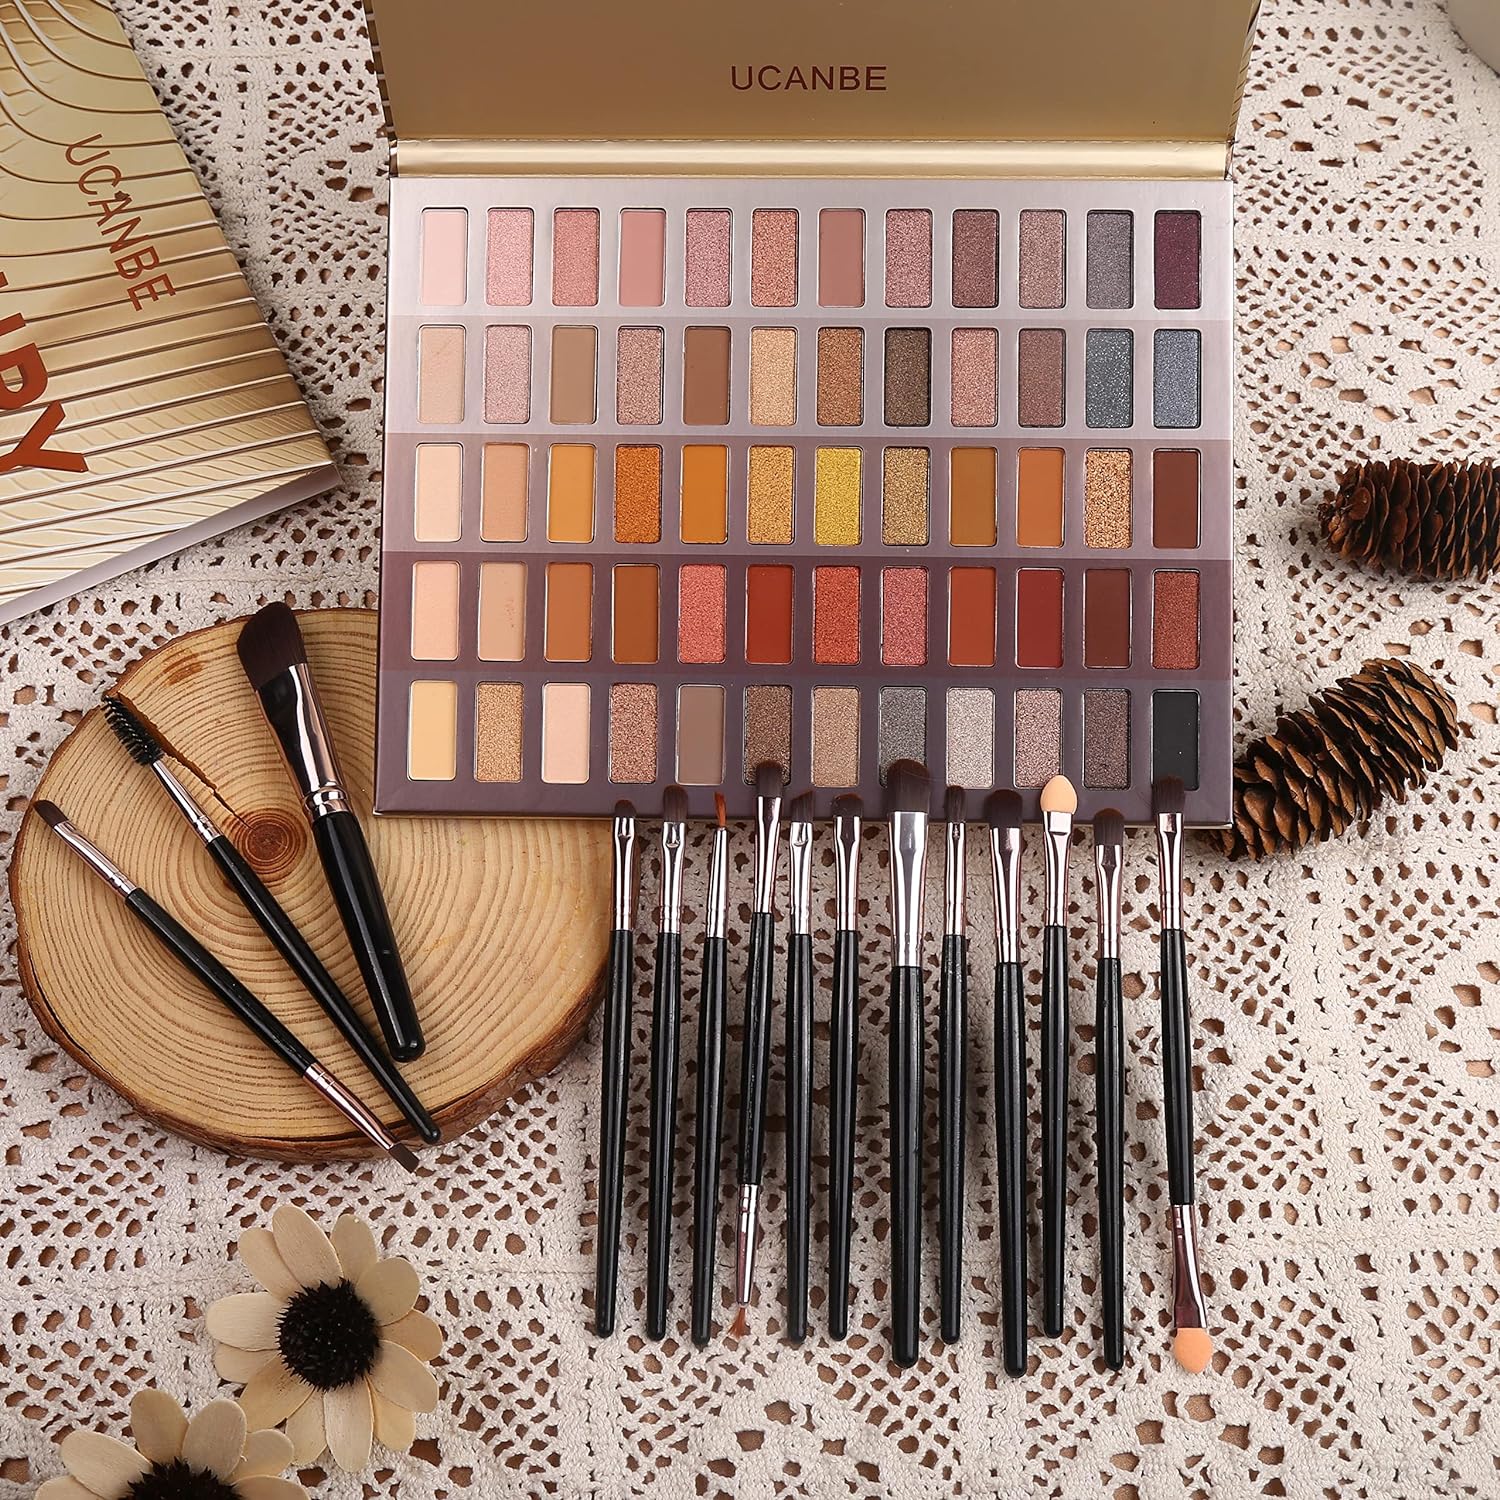 60 Colors Naked Eyeshadow Palette + Makeup Brush Set, All in One Nude Neutral Smokey Makeup Pallet with Brushes, Pigmented Warm Matte Shimmer Powder Eye Shadows Cosmetic Halloween Beauty Kit - HealthFulBeautyLife